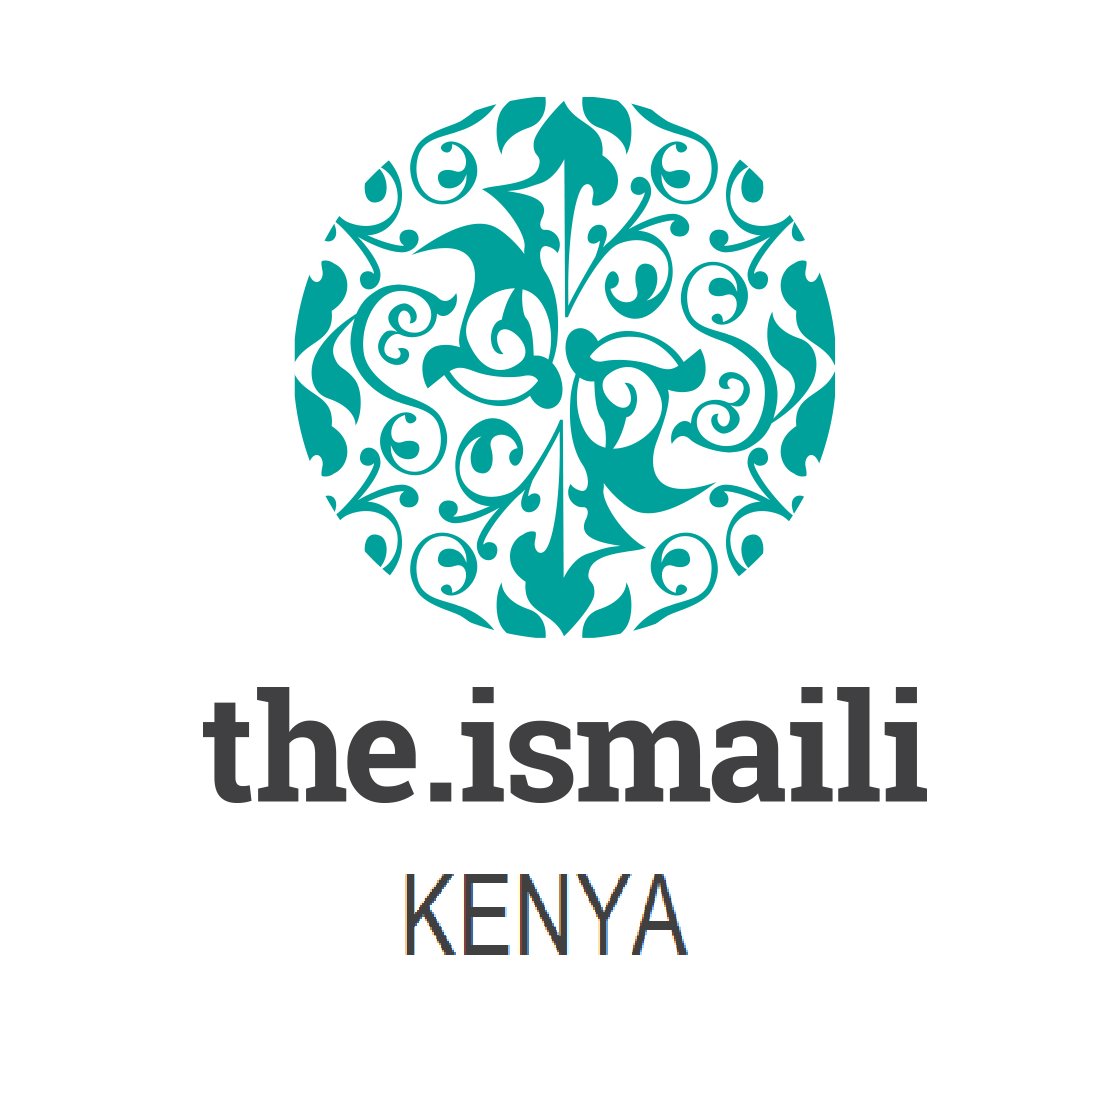 Tweets from the official website of the Ismaili community in Kenya. (RTs do not imply endorsement.)